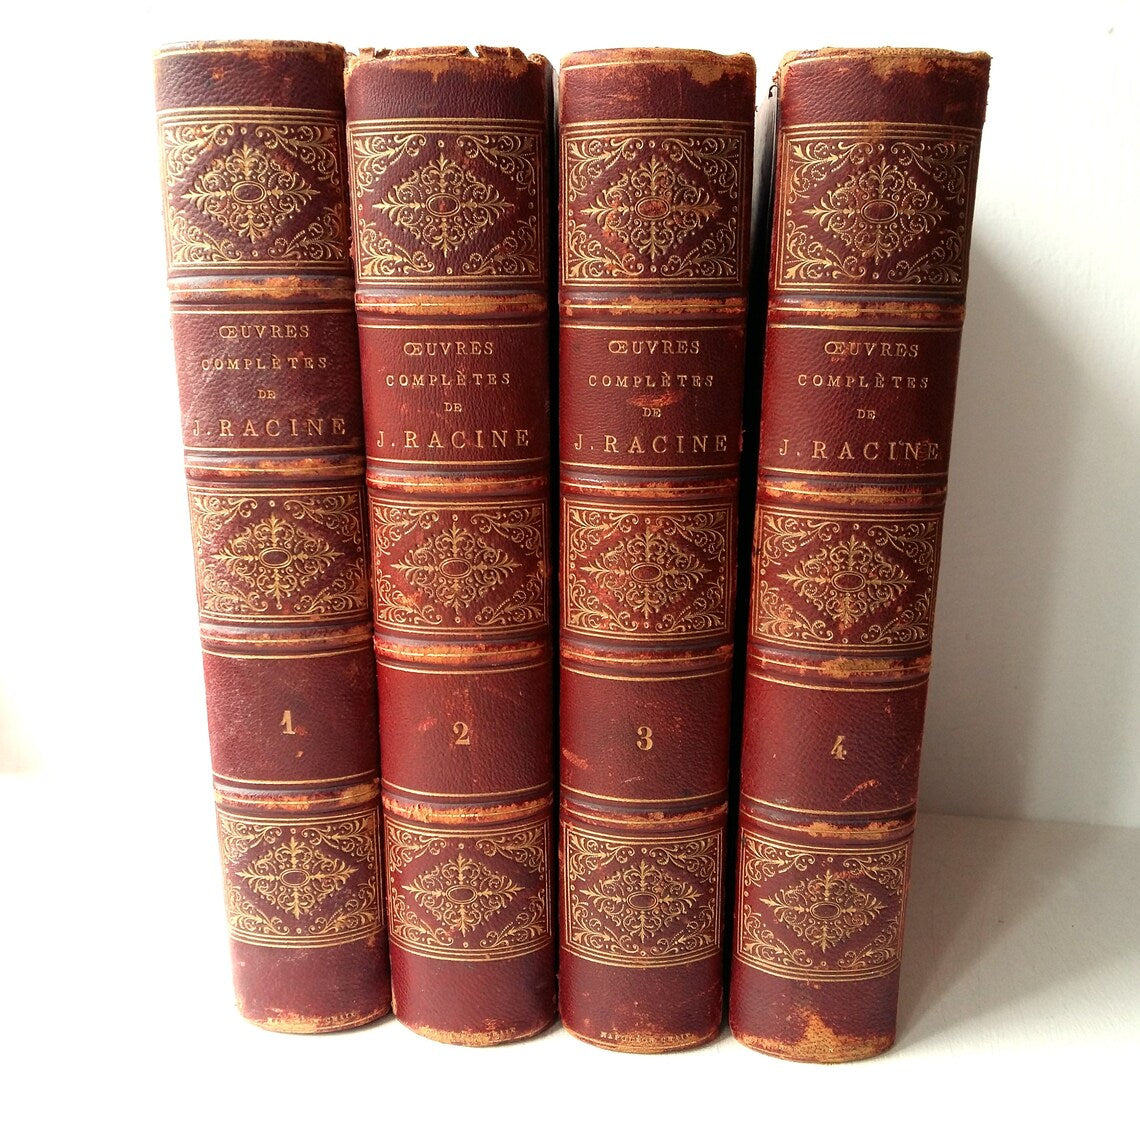 The Complete Works of Racine. 1864 Editions from Tiggy & Pip - Just €80! Shop now at Tiggy and Pip